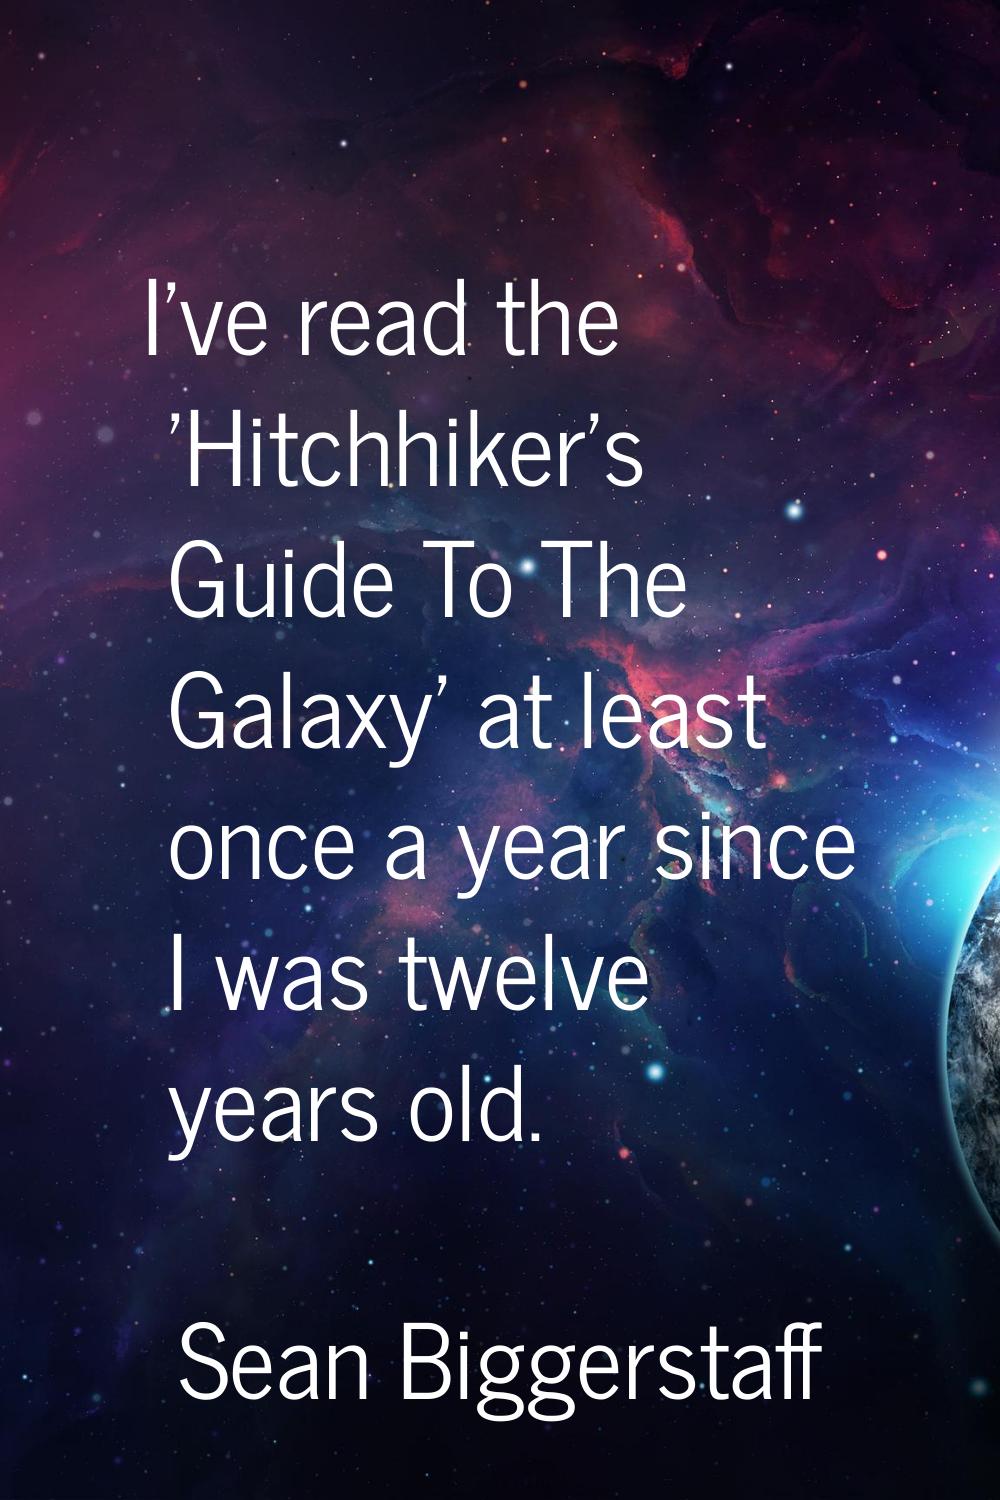 I've read the 'Hitchhiker's Guide To The Galaxy' at least once a year since I was twelve years old.